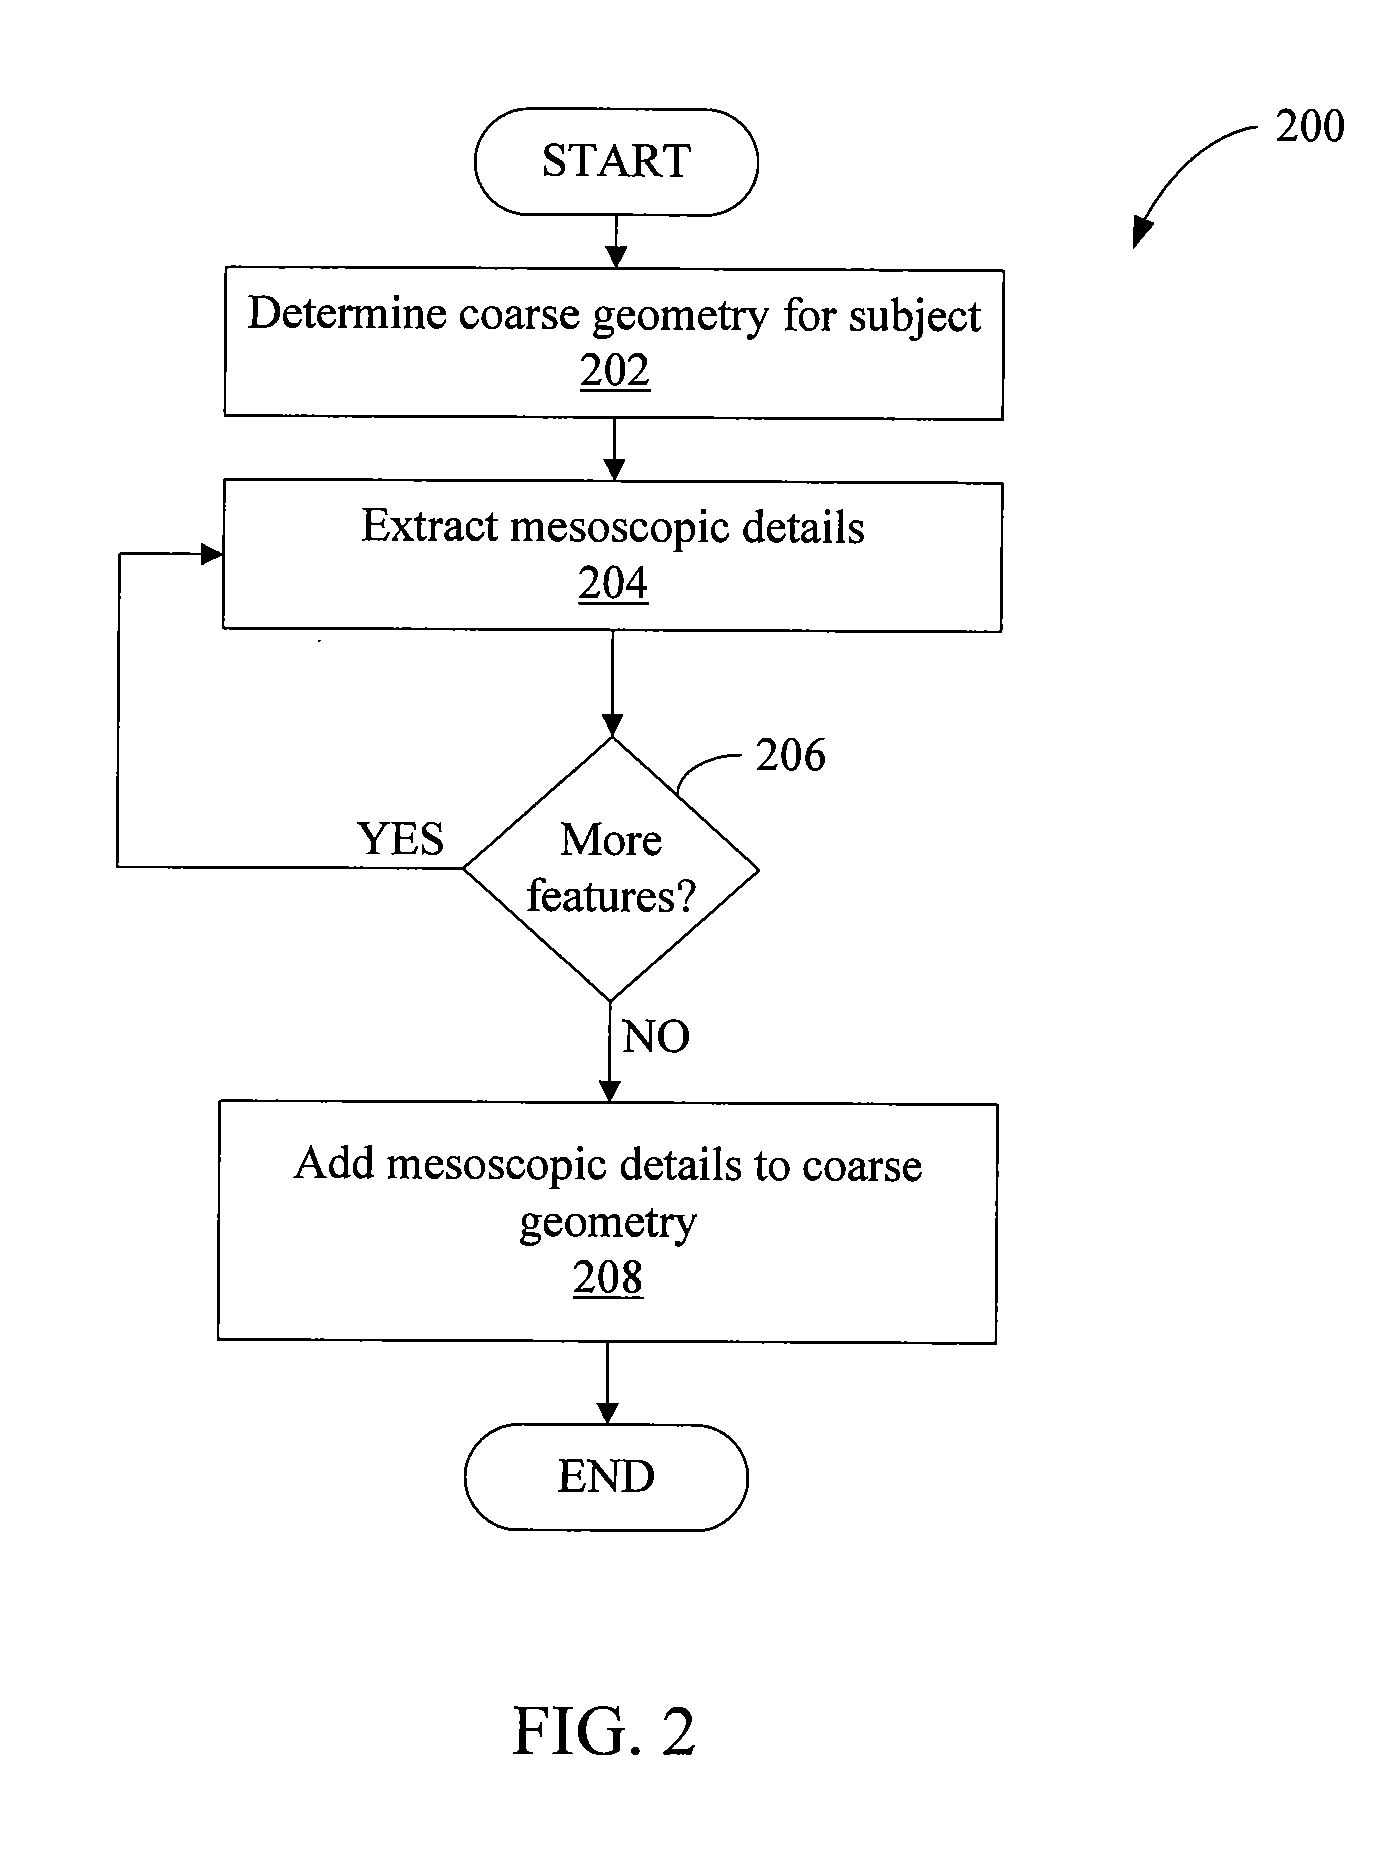 System and method for calculating an optimization for a facial reconstruction based on photometric and surface consistency